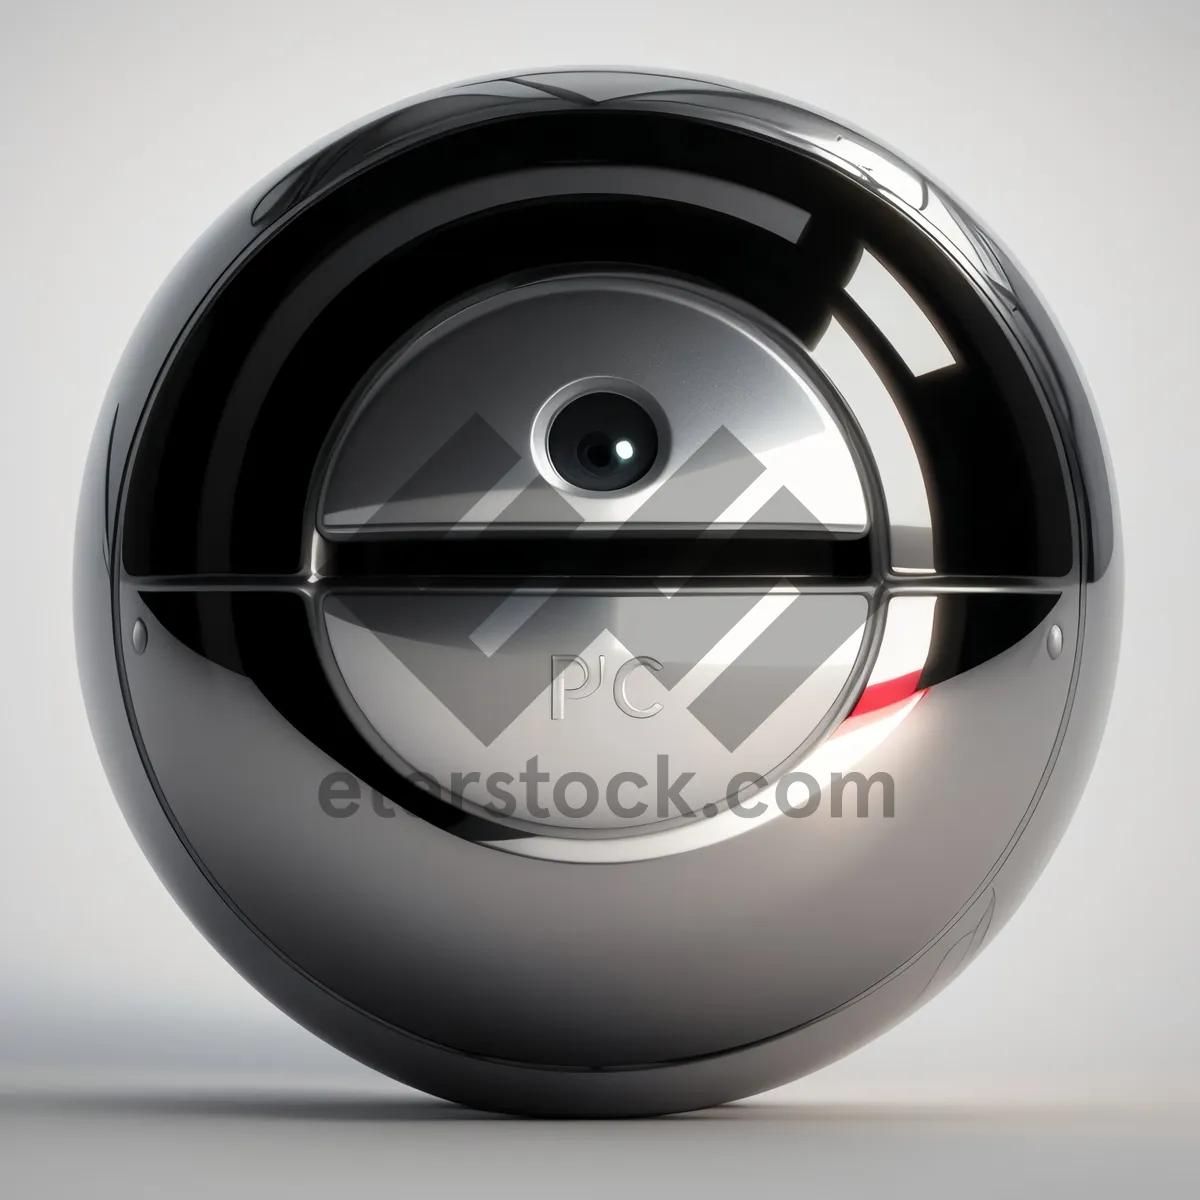 Picture of Shiny Silver Metallic Audio Disk Icon